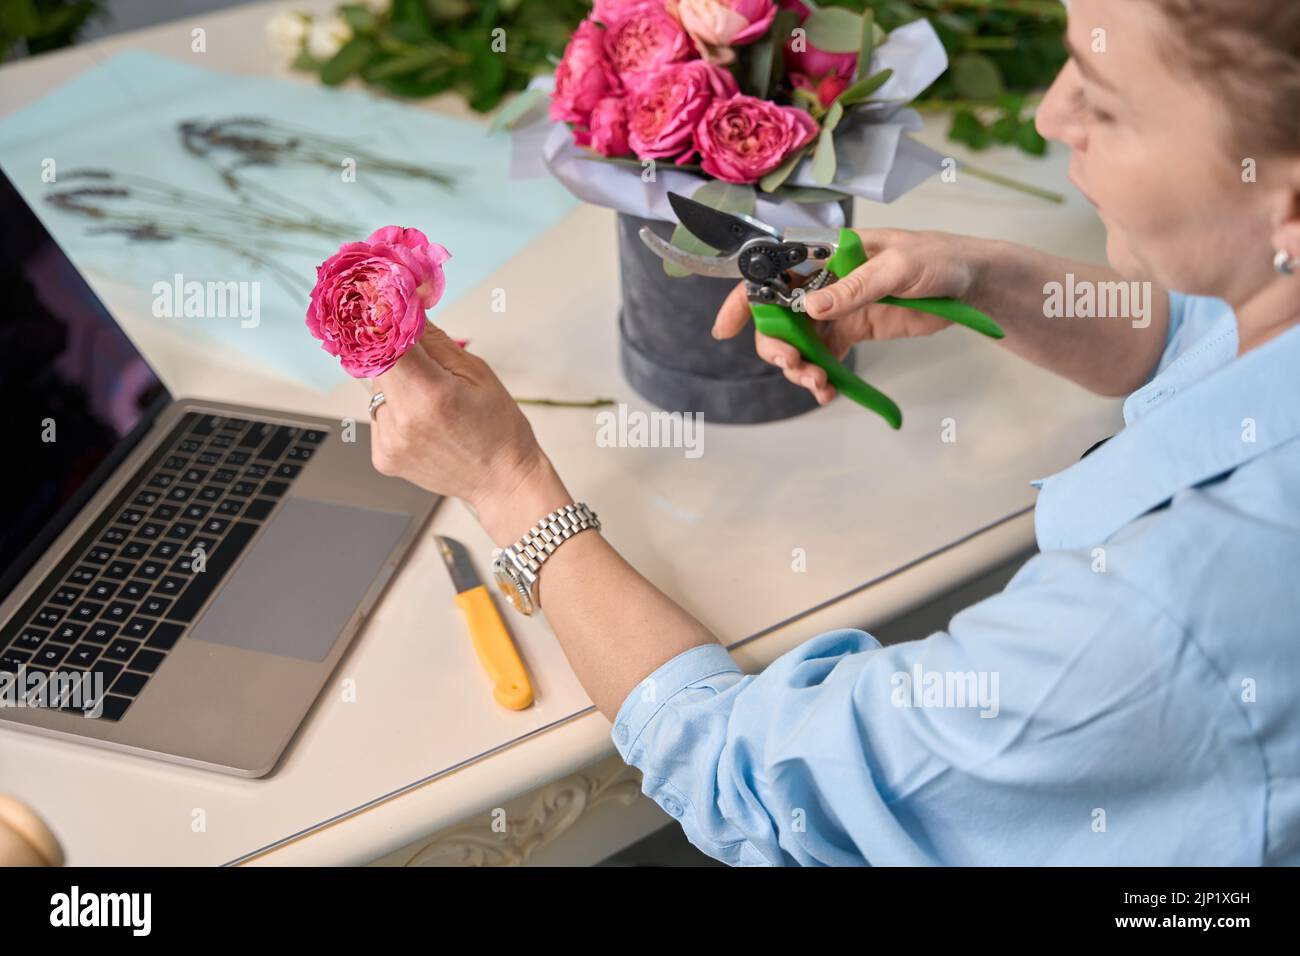 Nice woman florist teaches to create flower bouquet in box Stock Photo